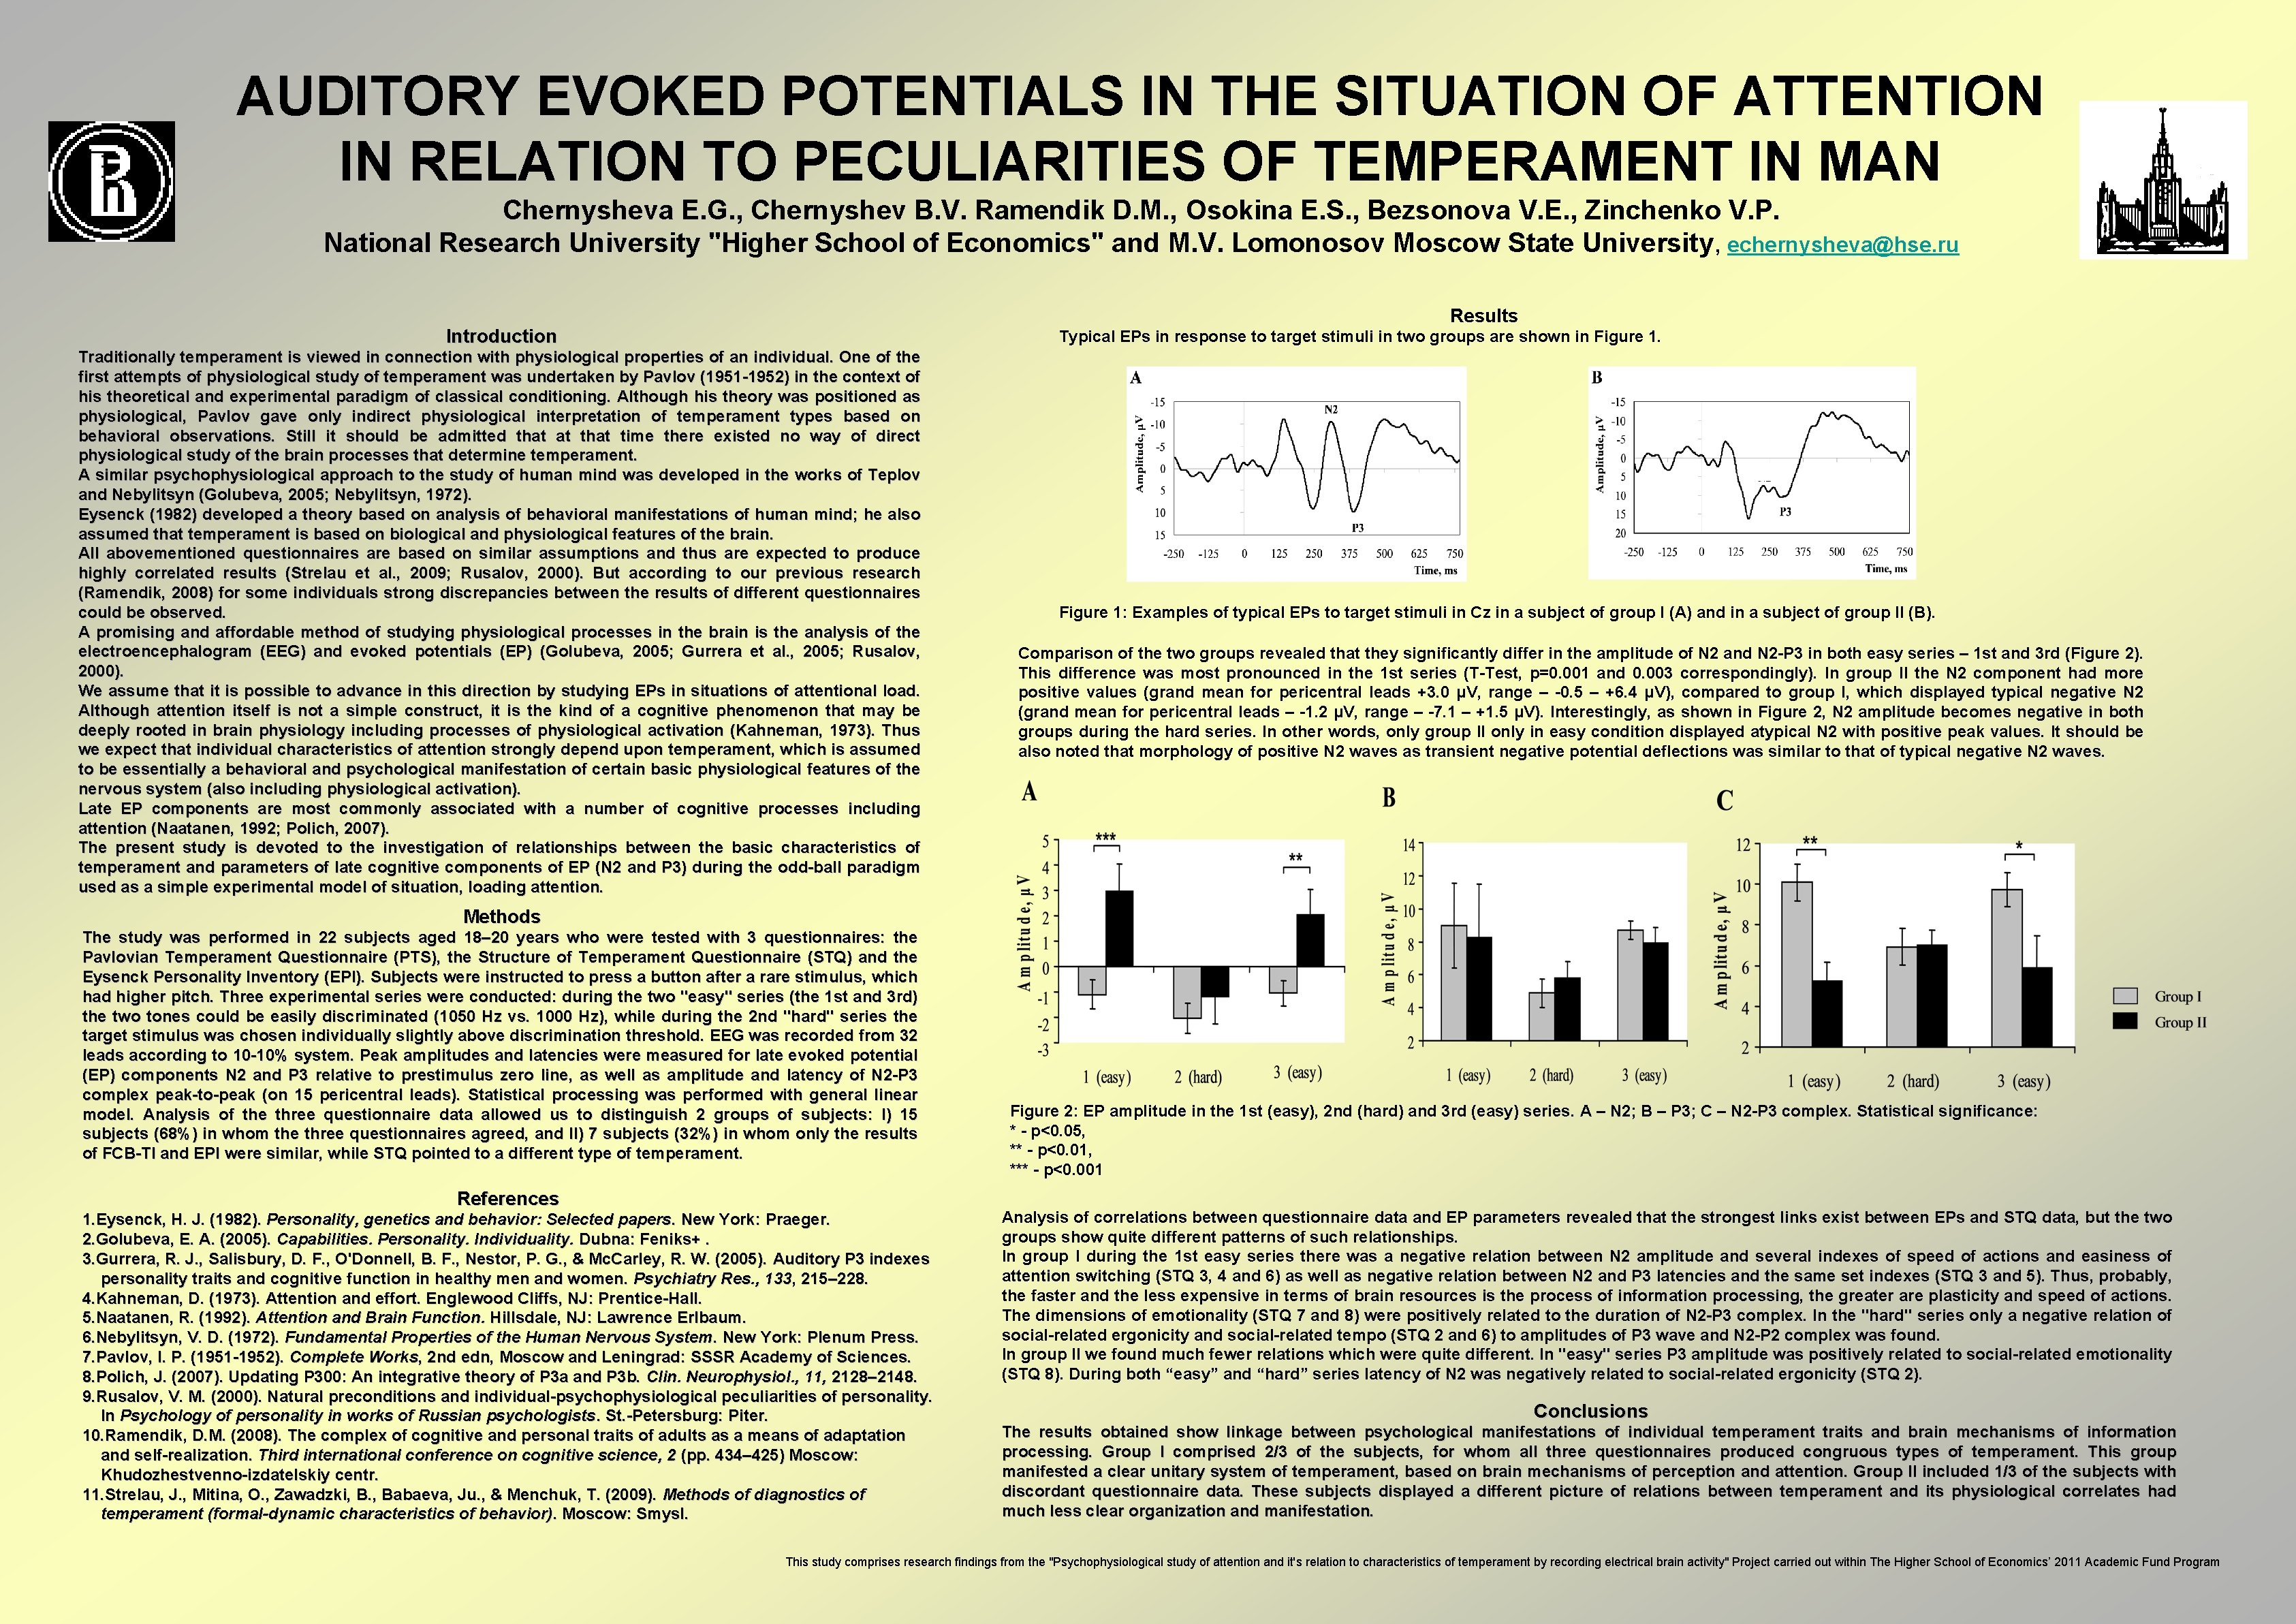 AUDITORY EVOKED POTENTIALS IN THE SITUATION OF ATTENTION IN RELATION TO PECULIARITIES OF TEMPERAMENT